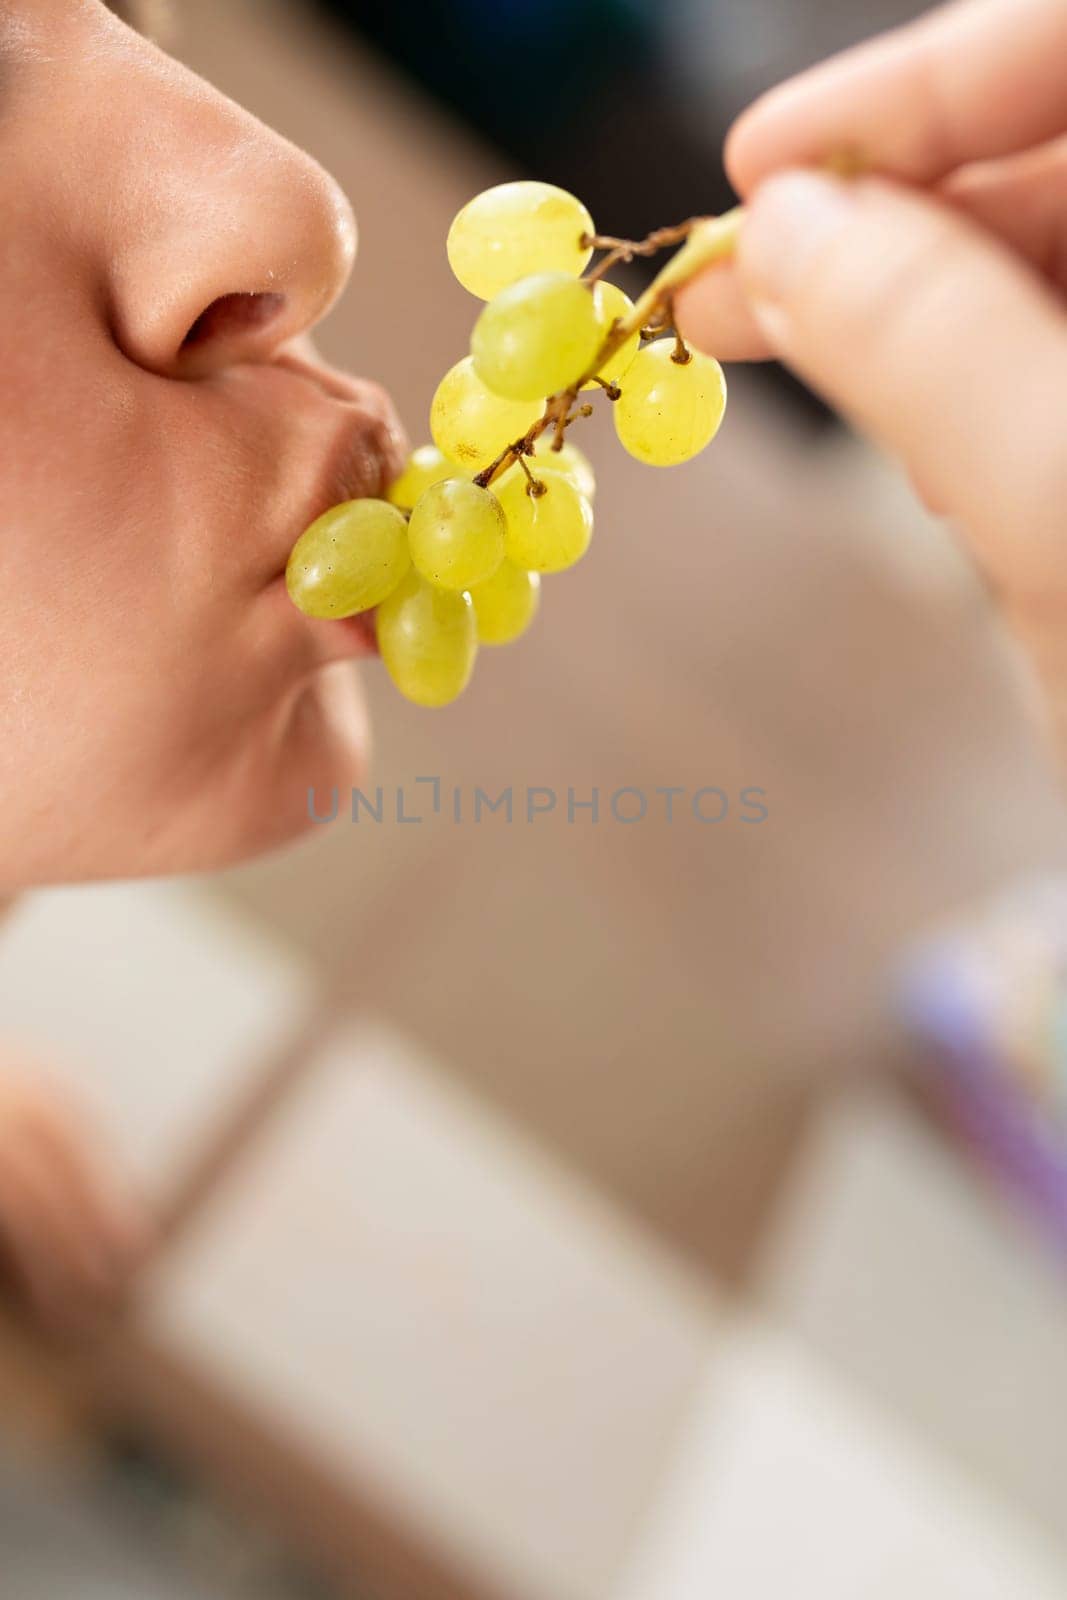 woman eating fruit during snack.